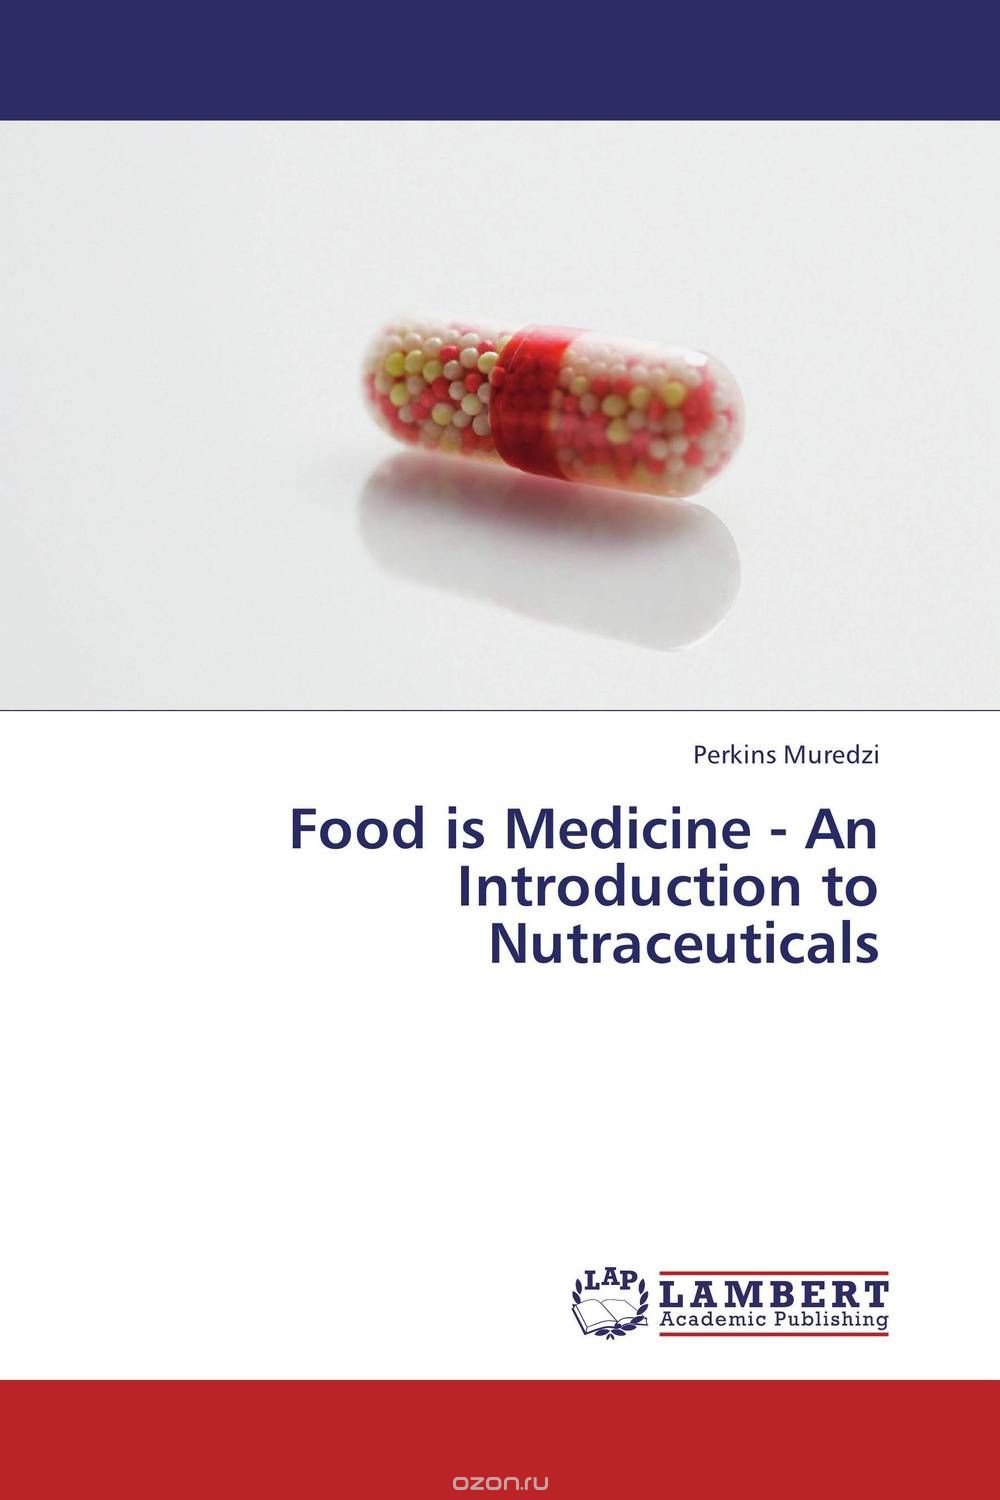 Food is Medicine - An Introduction to Nutraceuticals